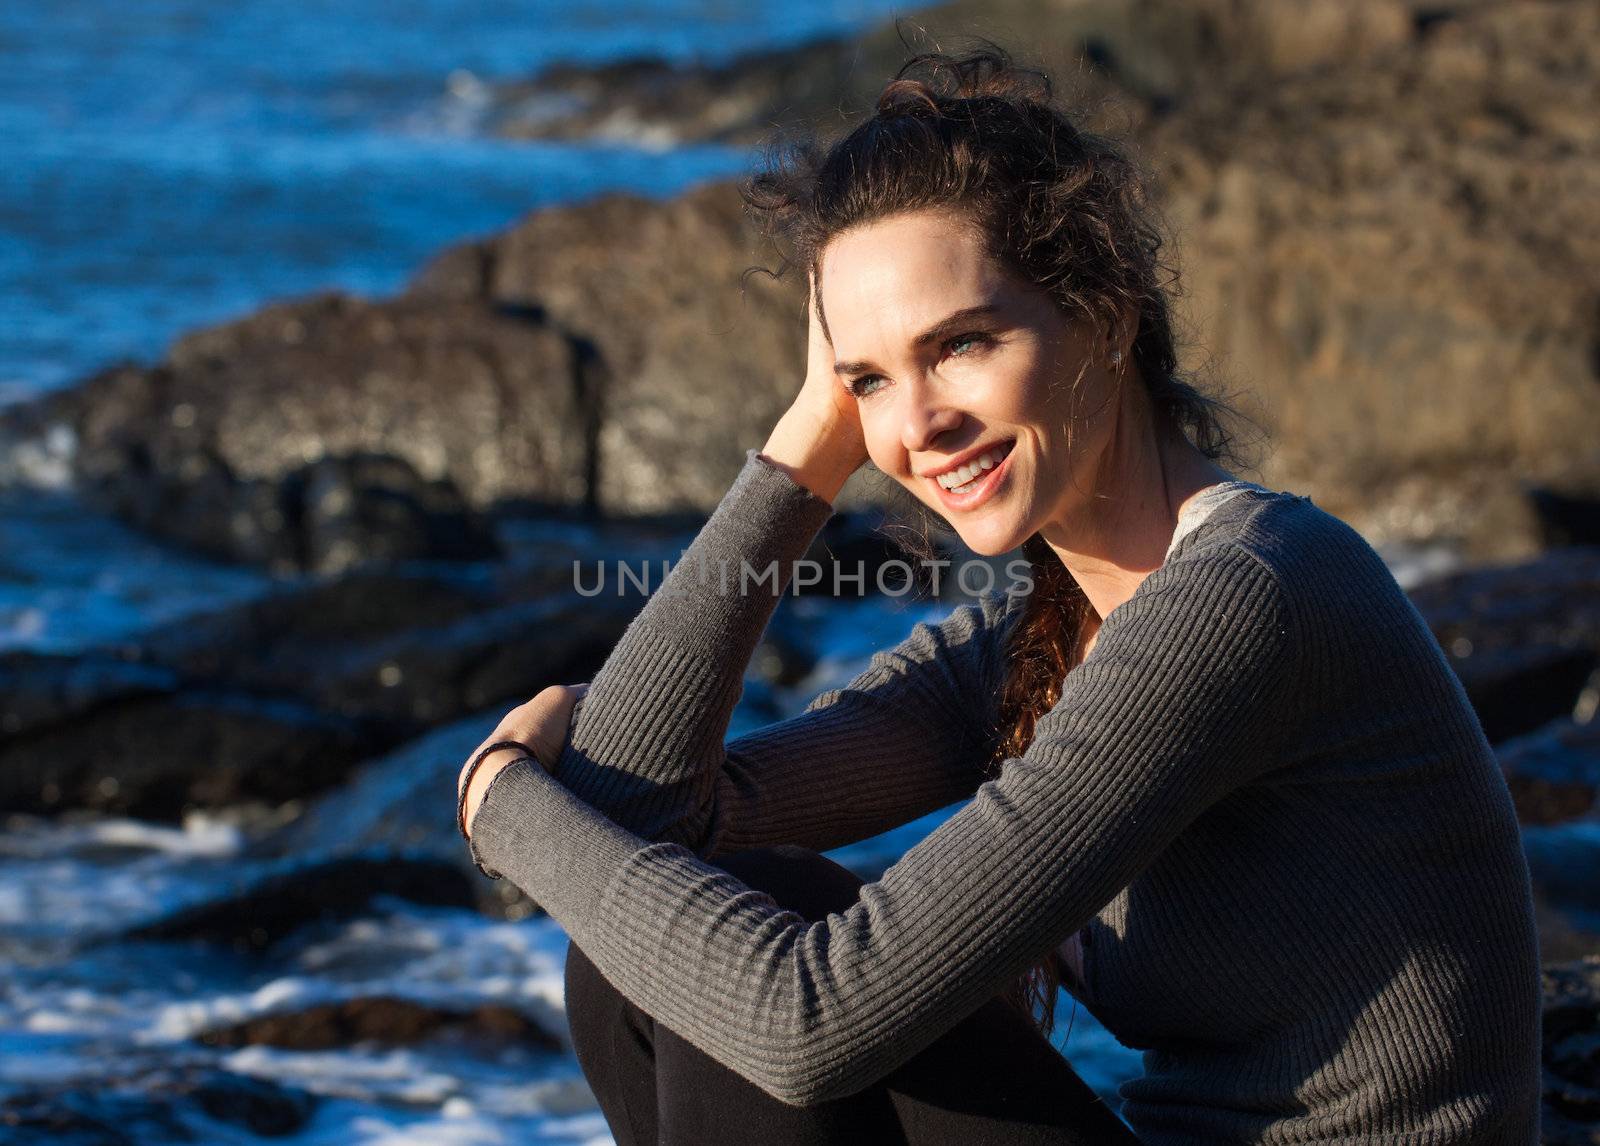 A happy smiling woman sitting by the ocean enjoying the sunshine